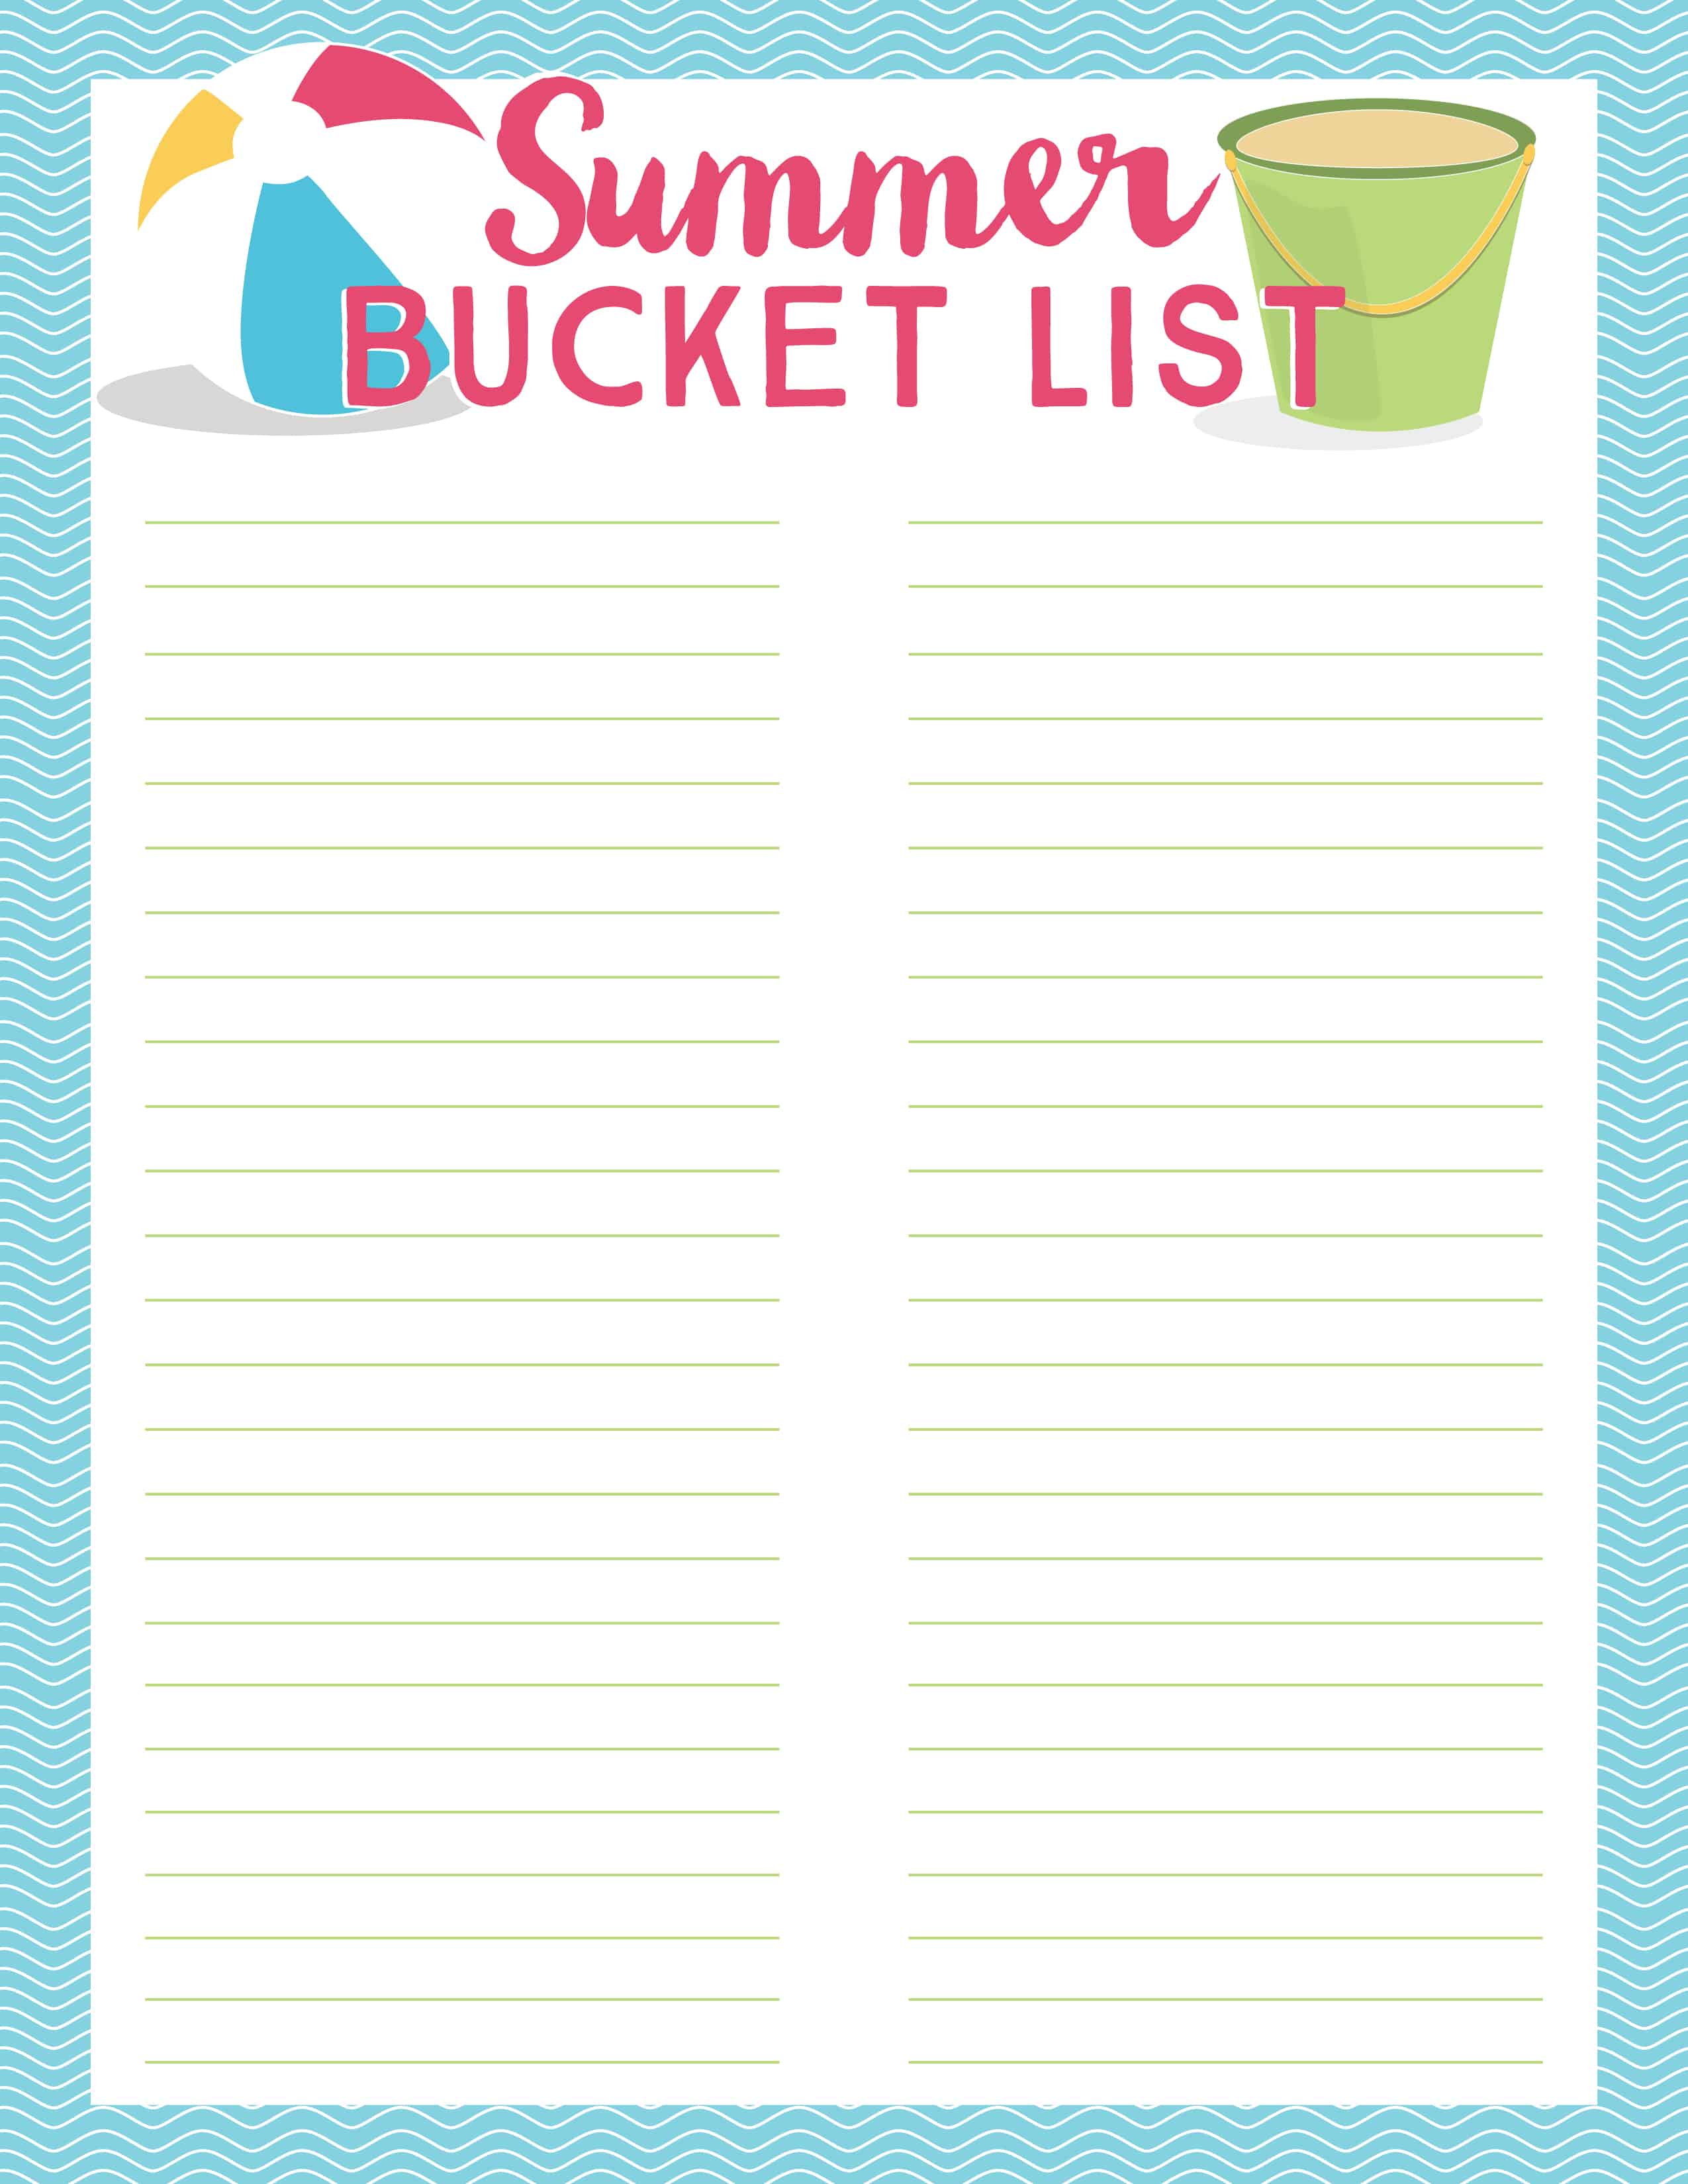 Use our free printable blank Summer Bucket List to create your own fun list of ideas for your family. Plus, click through to see 100 Summer Bucket List ideas. 